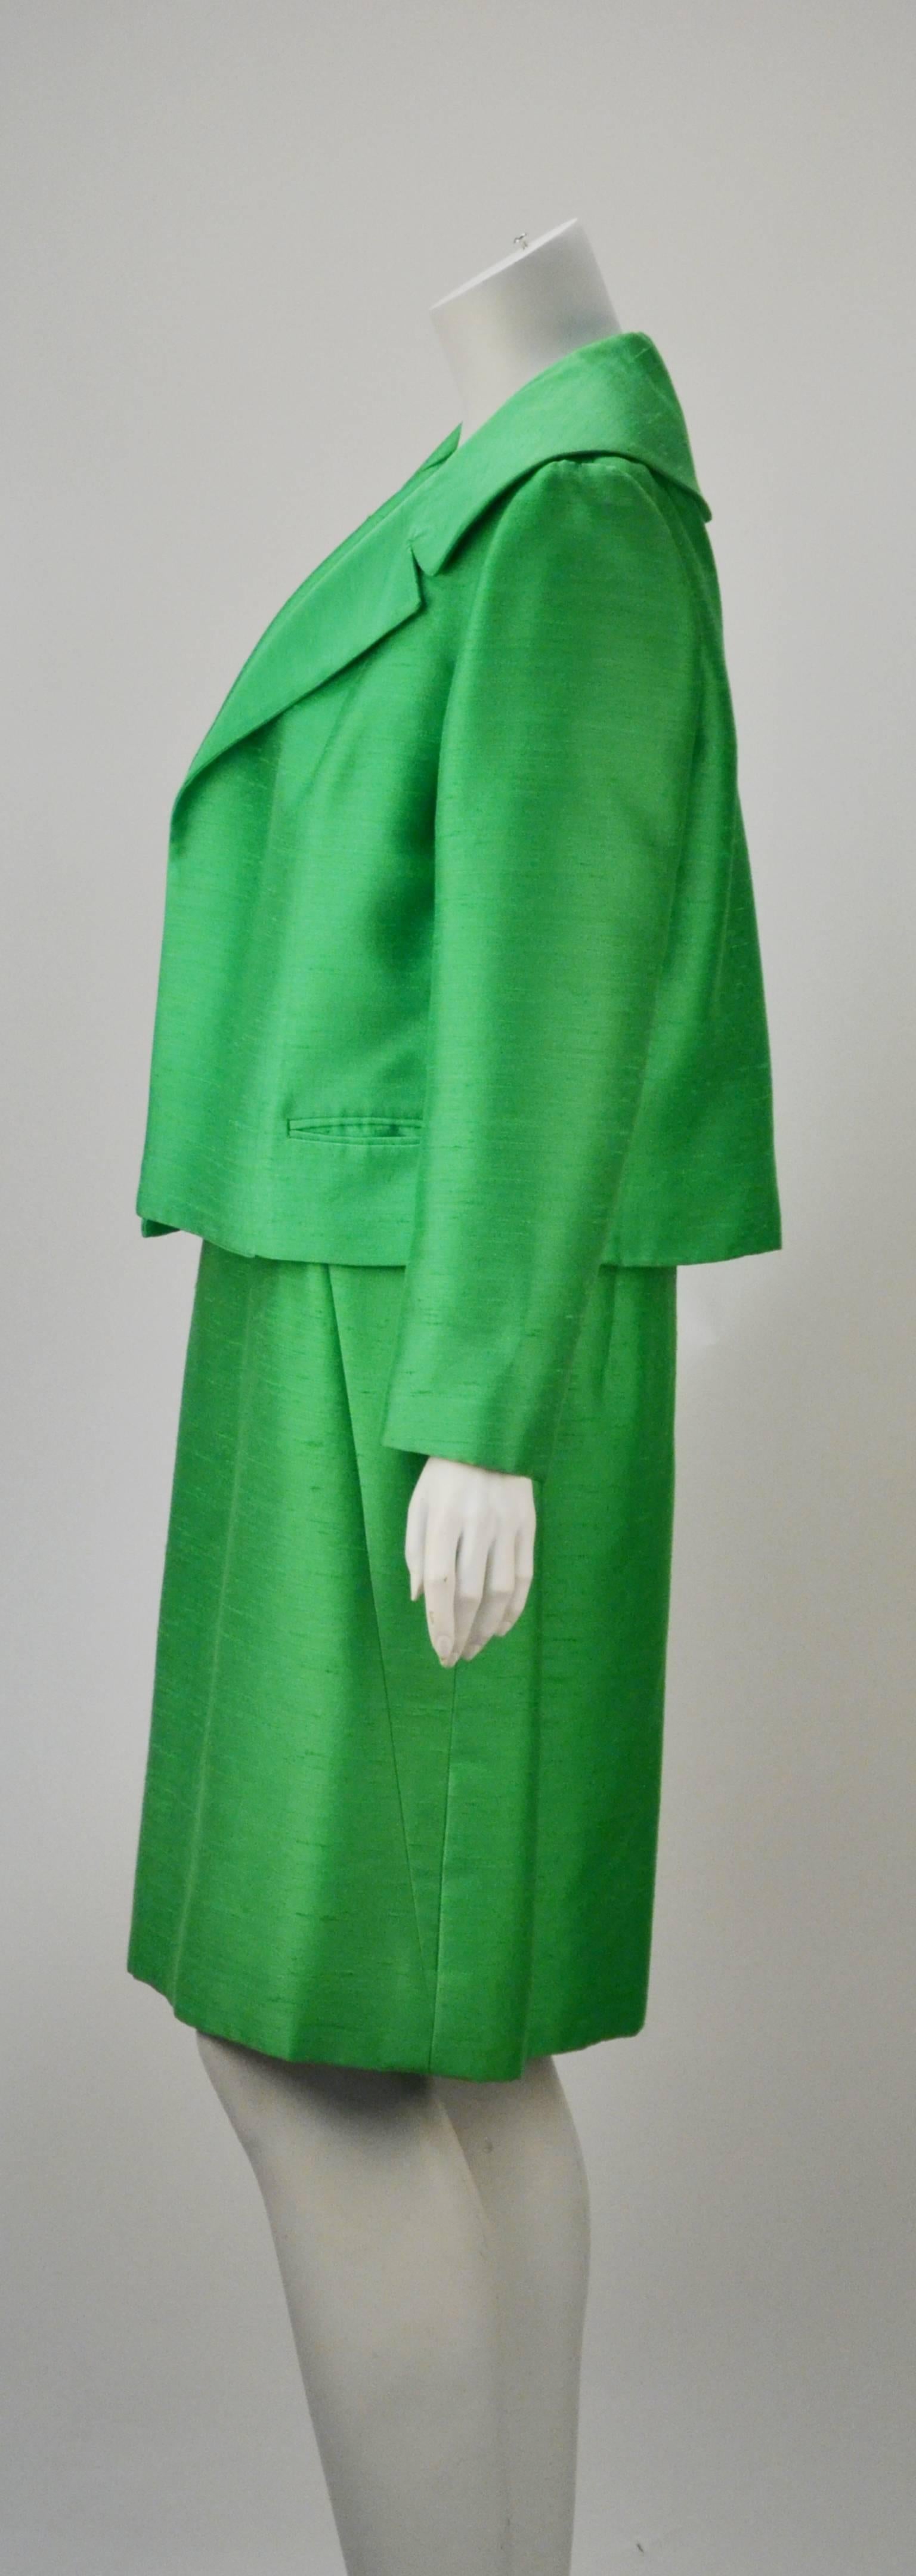 1960s Mr. Blackwell Custom Green Silk 2 Piece Dress and Jacket Ensemble In Good Condition For Sale In Houston, TX